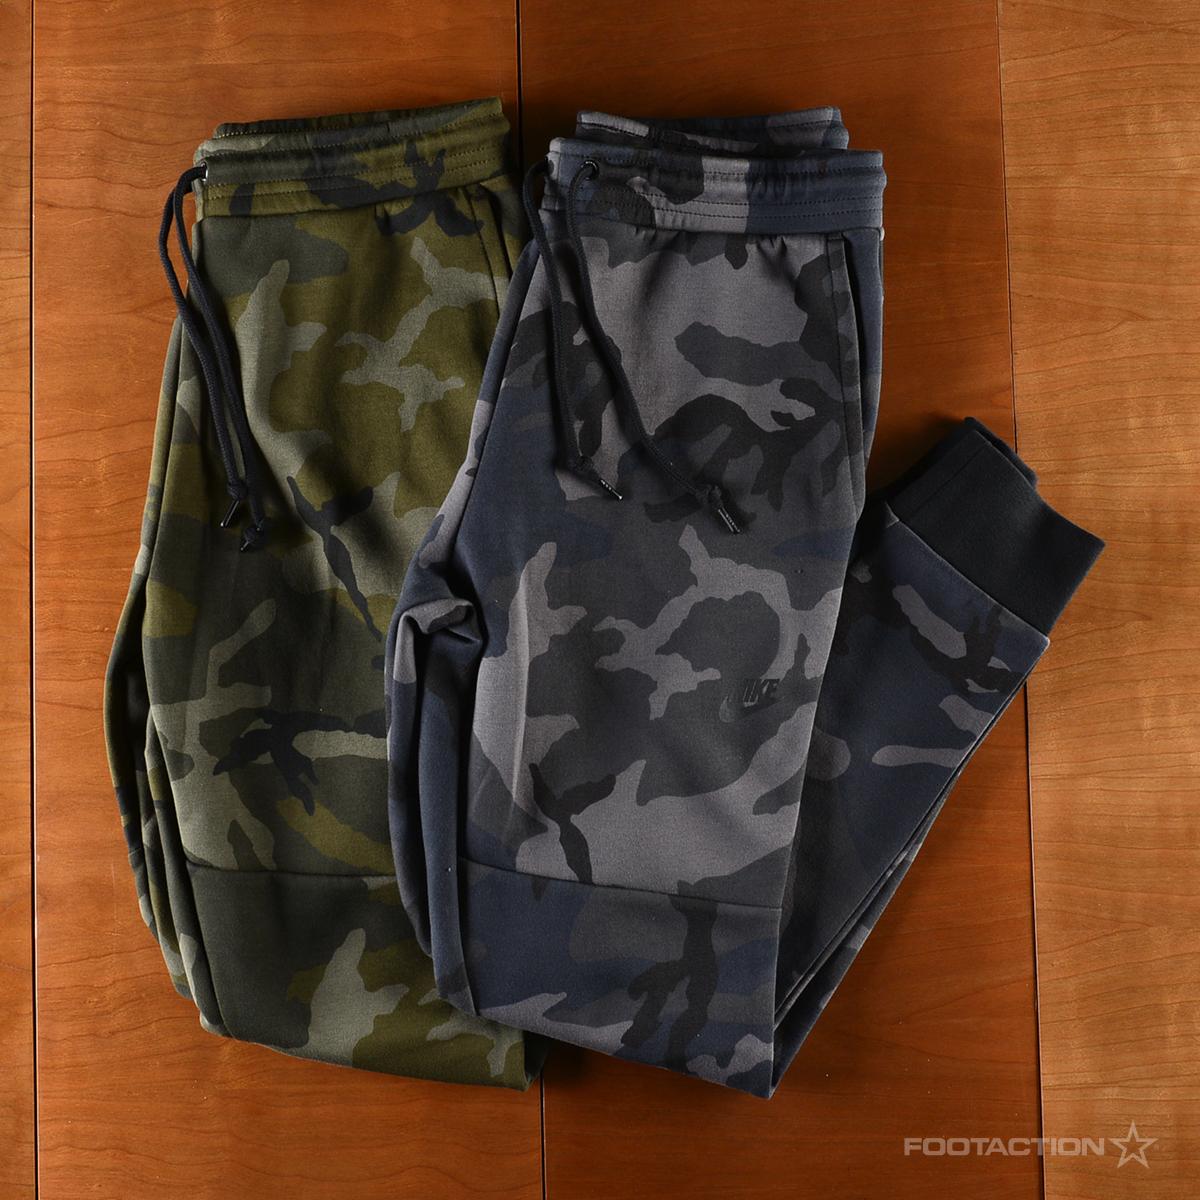 lijden fiets ontrouw Footaction on Twitter: "Check out the new Camo #Nike Tech Fleece Jogger pant.  Available in select stores. http://t.co/EXPvMEuI8M" / Twitter